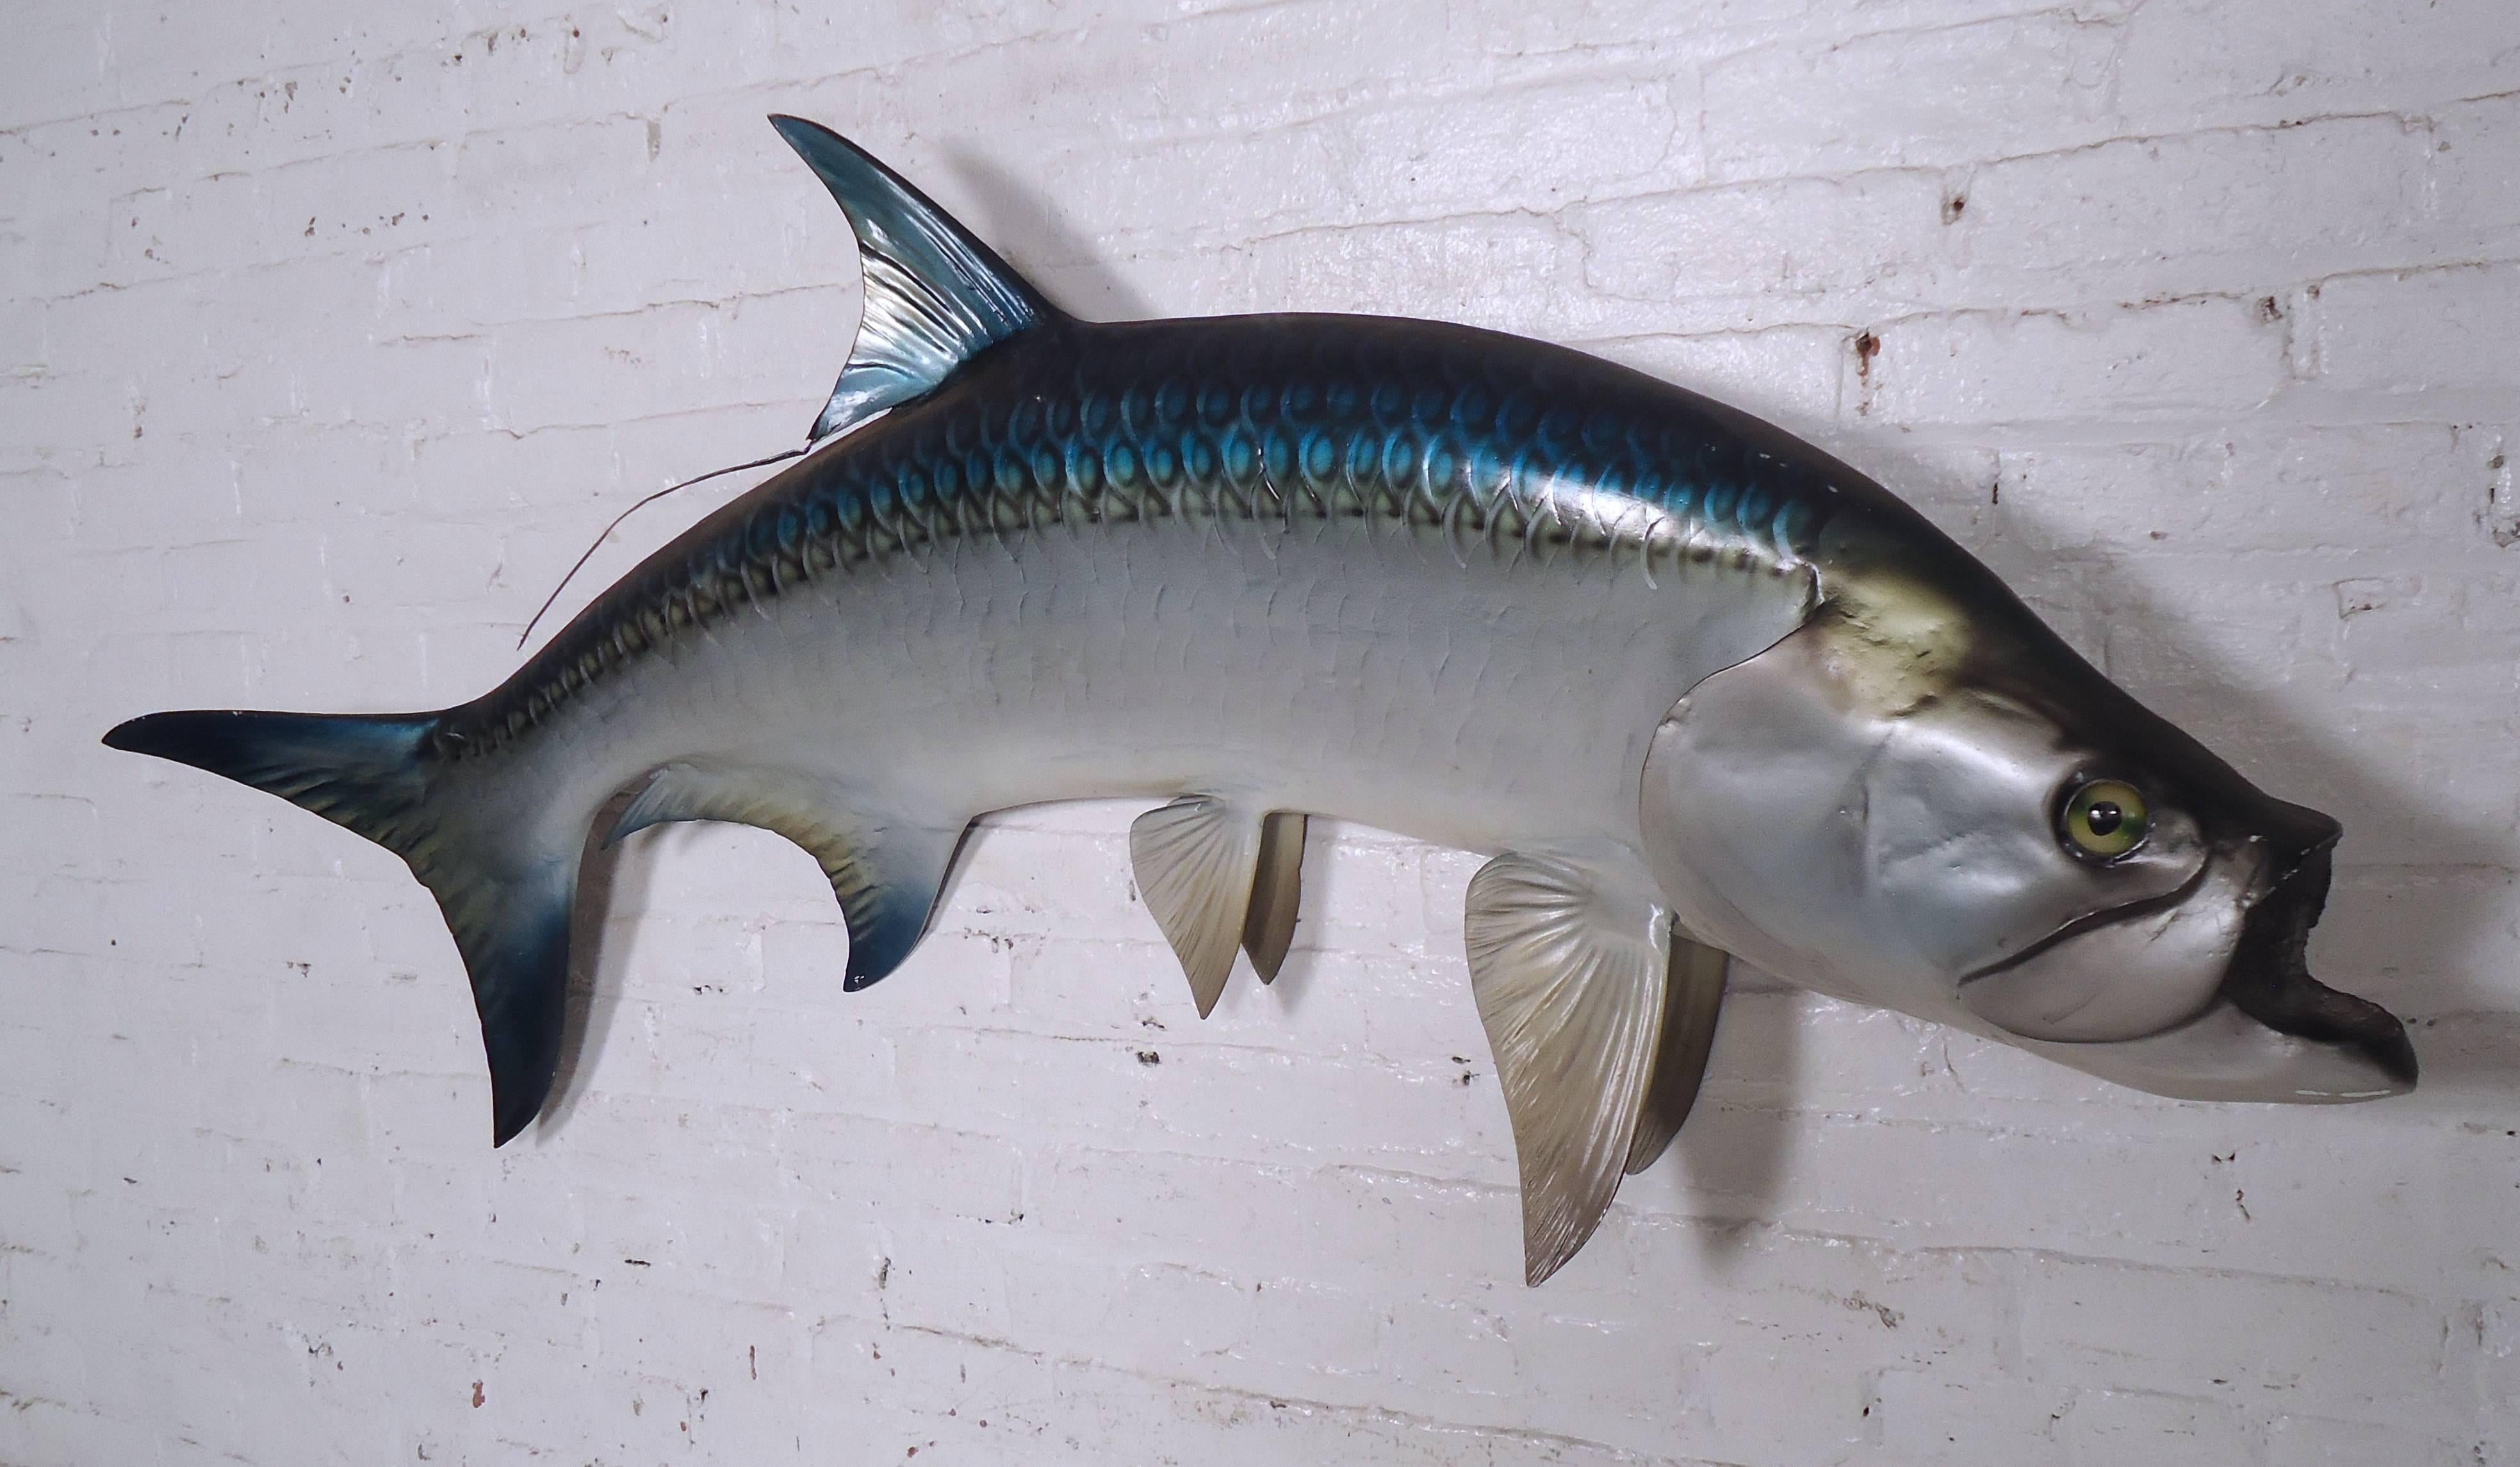 Large wall hanging fiberglass sea bass replica.

Please confirm item location NY or NJ with dealer.